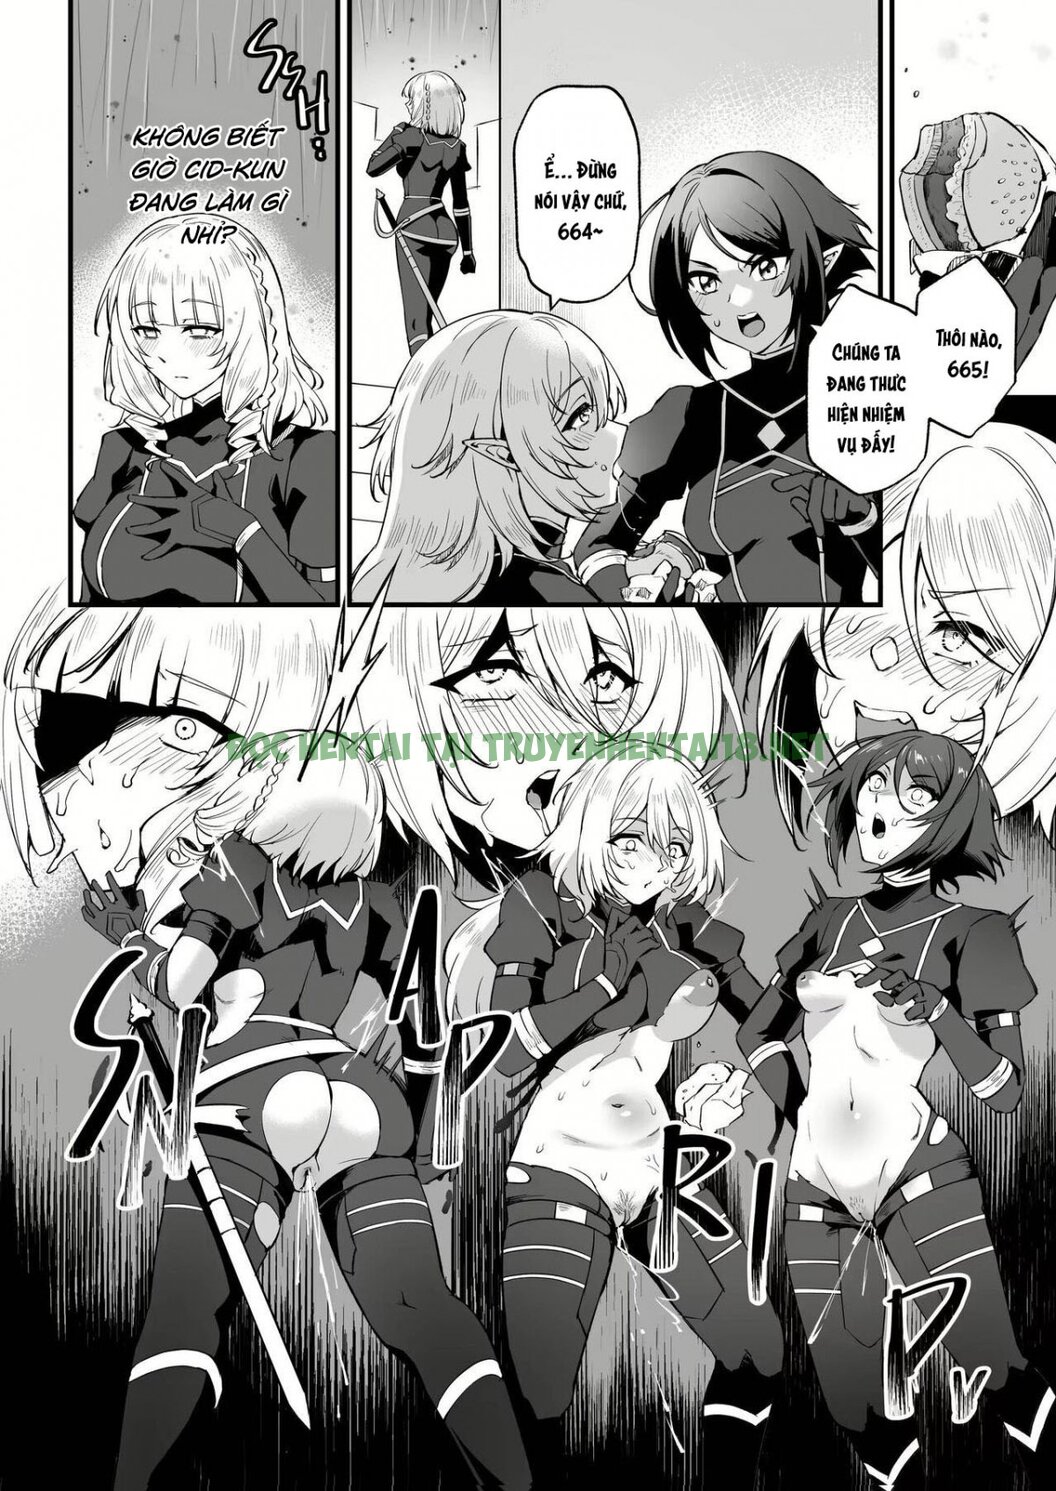 Xem ảnh I NEED MORE POWER! - Chapter 1.5 END - 10 - Hentai24h.Tv